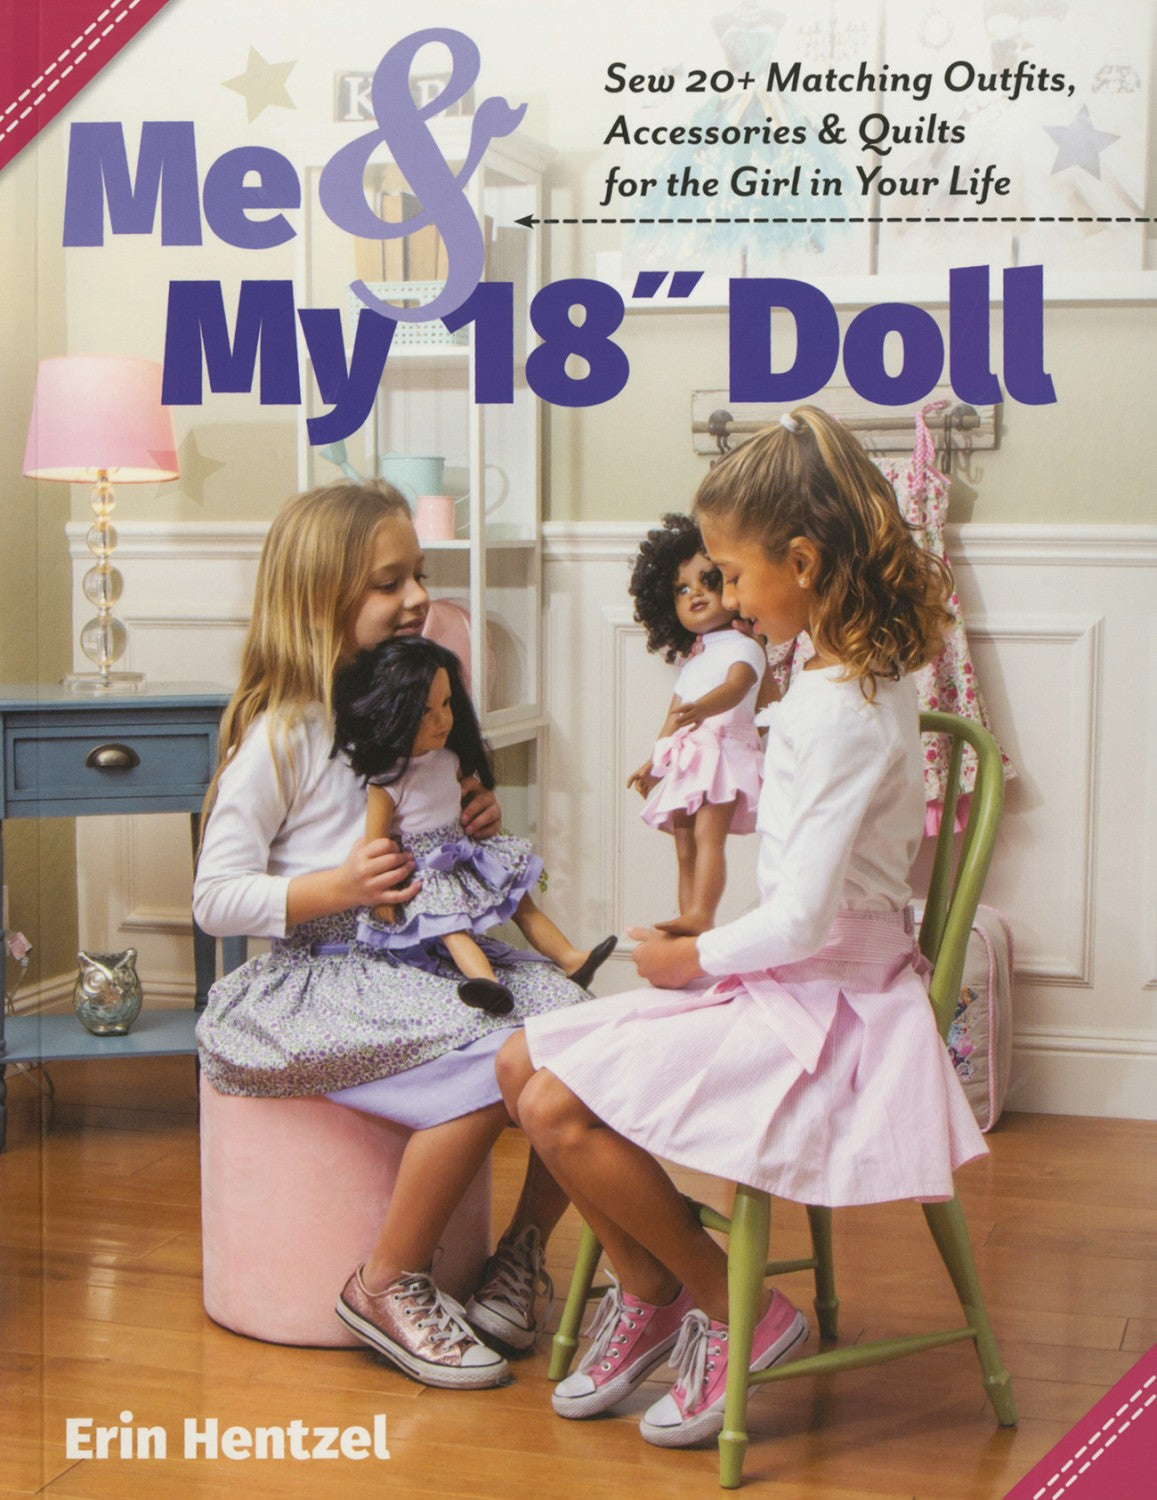 Me and My 18 inch Doll Sewing Book by Erin Hentzel for C&T Publishing